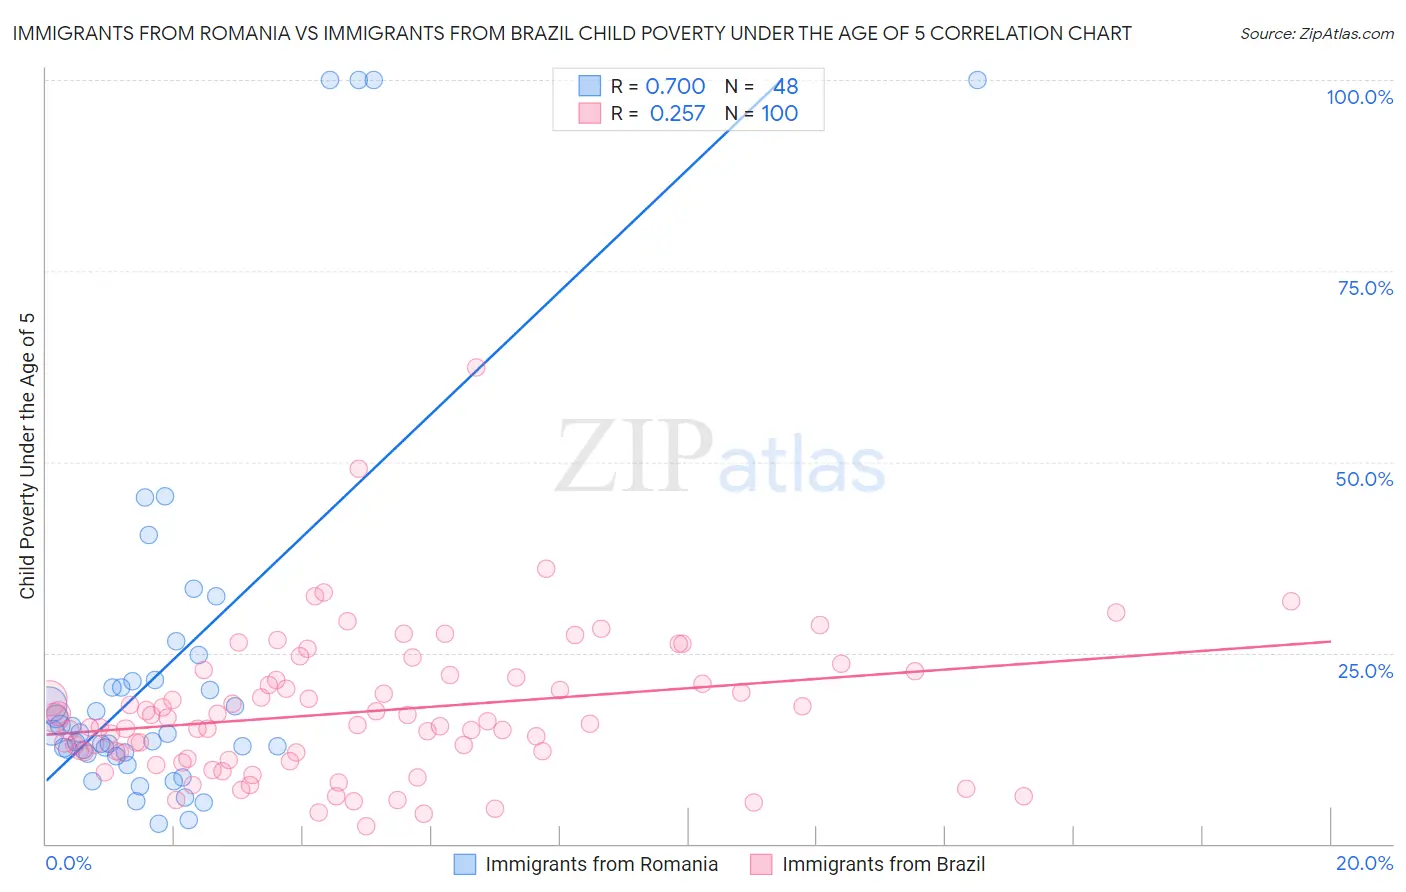 Immigrants from Romania vs Immigrants from Brazil Child Poverty Under the Age of 5